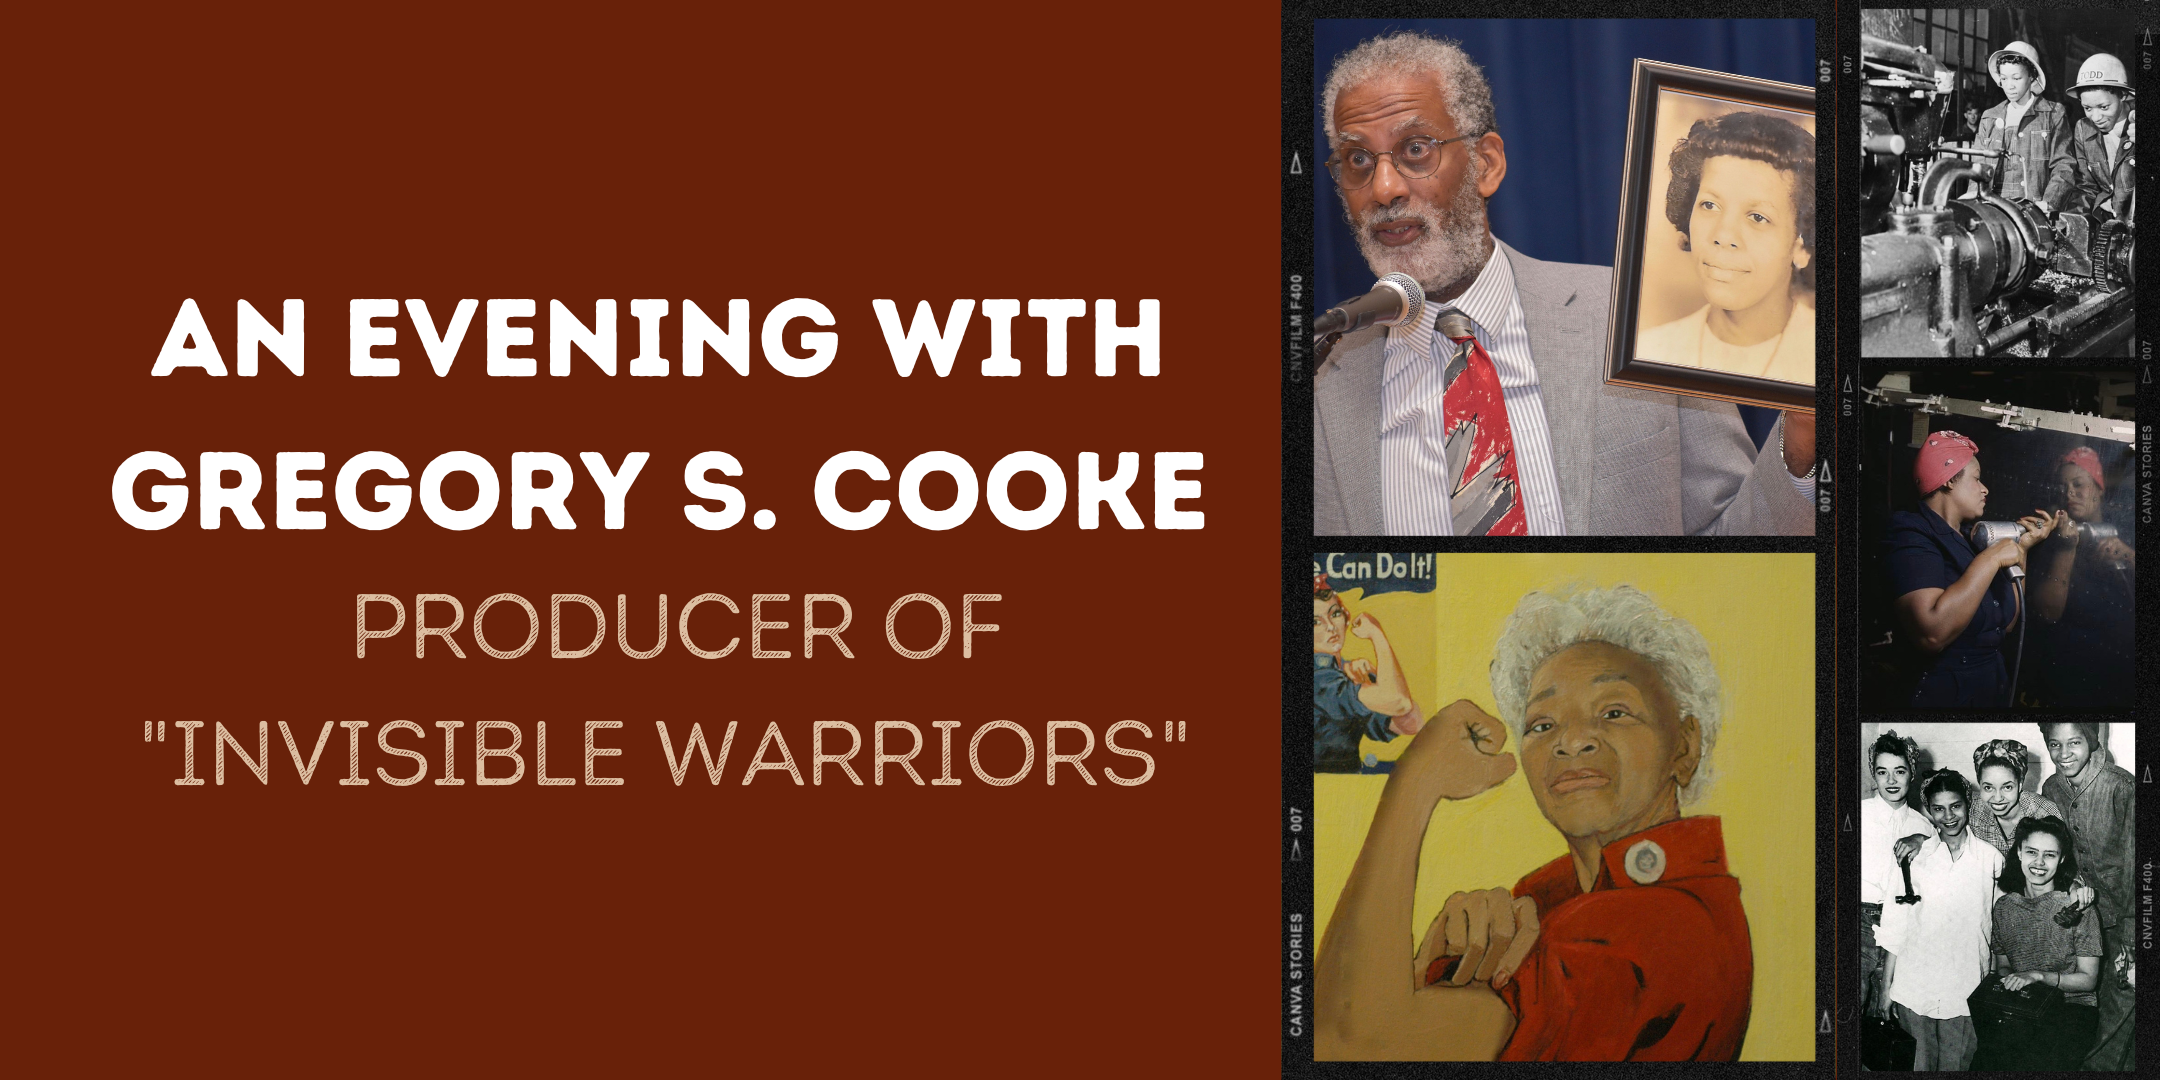 image of "An Evening with Gregory S. Cooke, Producer of "Invisible Warriors""